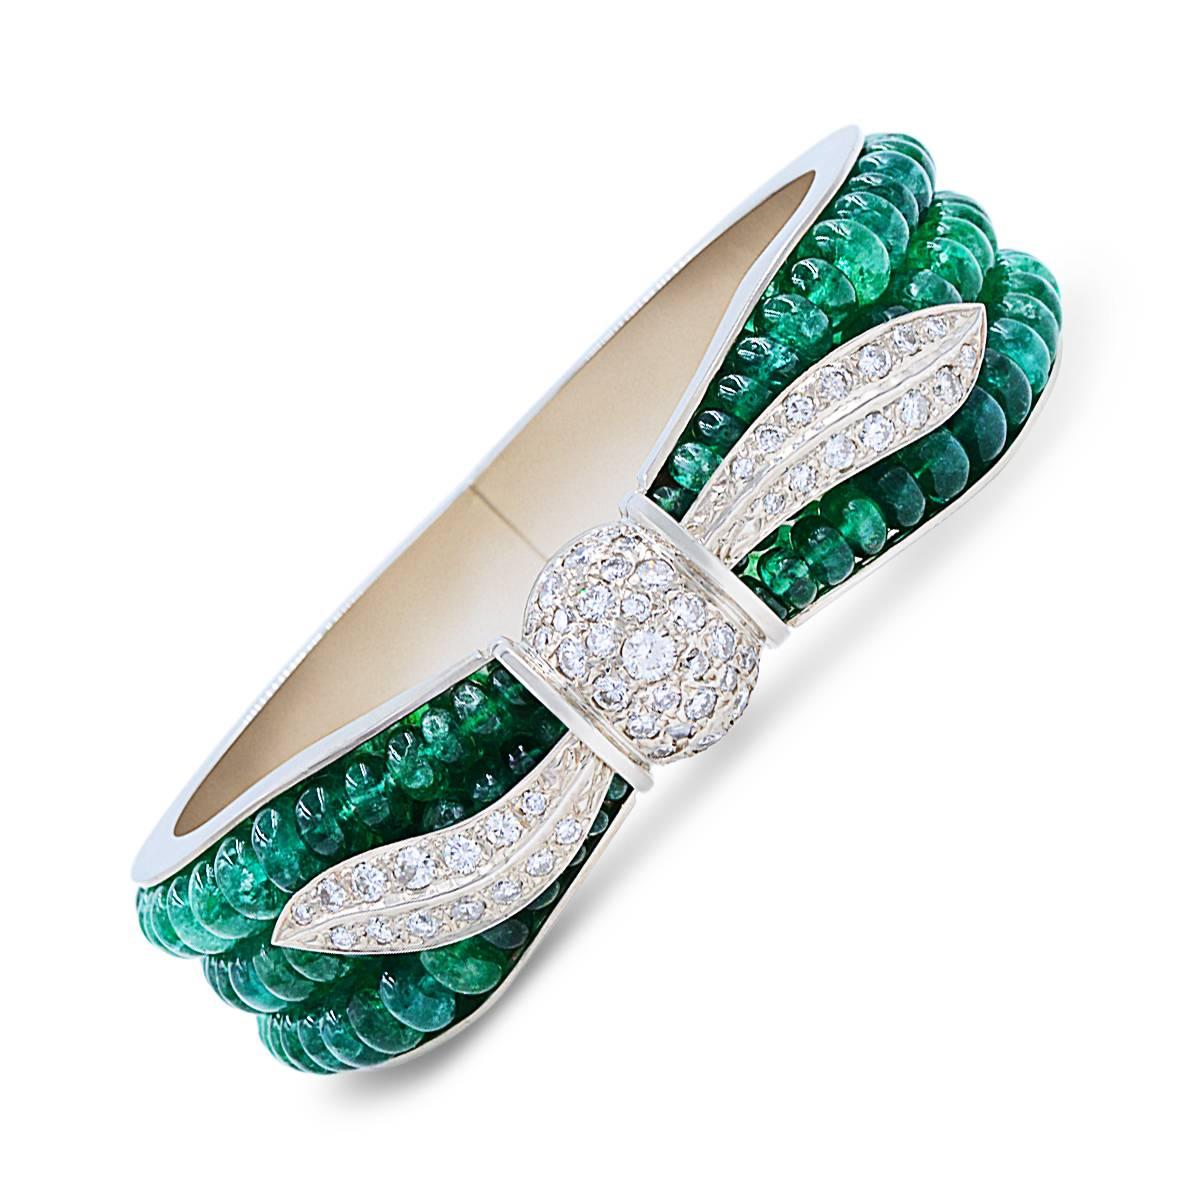 Overlapping green button shape emeralds from Colombian mines of Muzo with this bright and cheerful Victorian-era look we are sure this bangle bracelet will make a stunning gift. Crafted in 14k white gold we are excited for you to have it or purchase